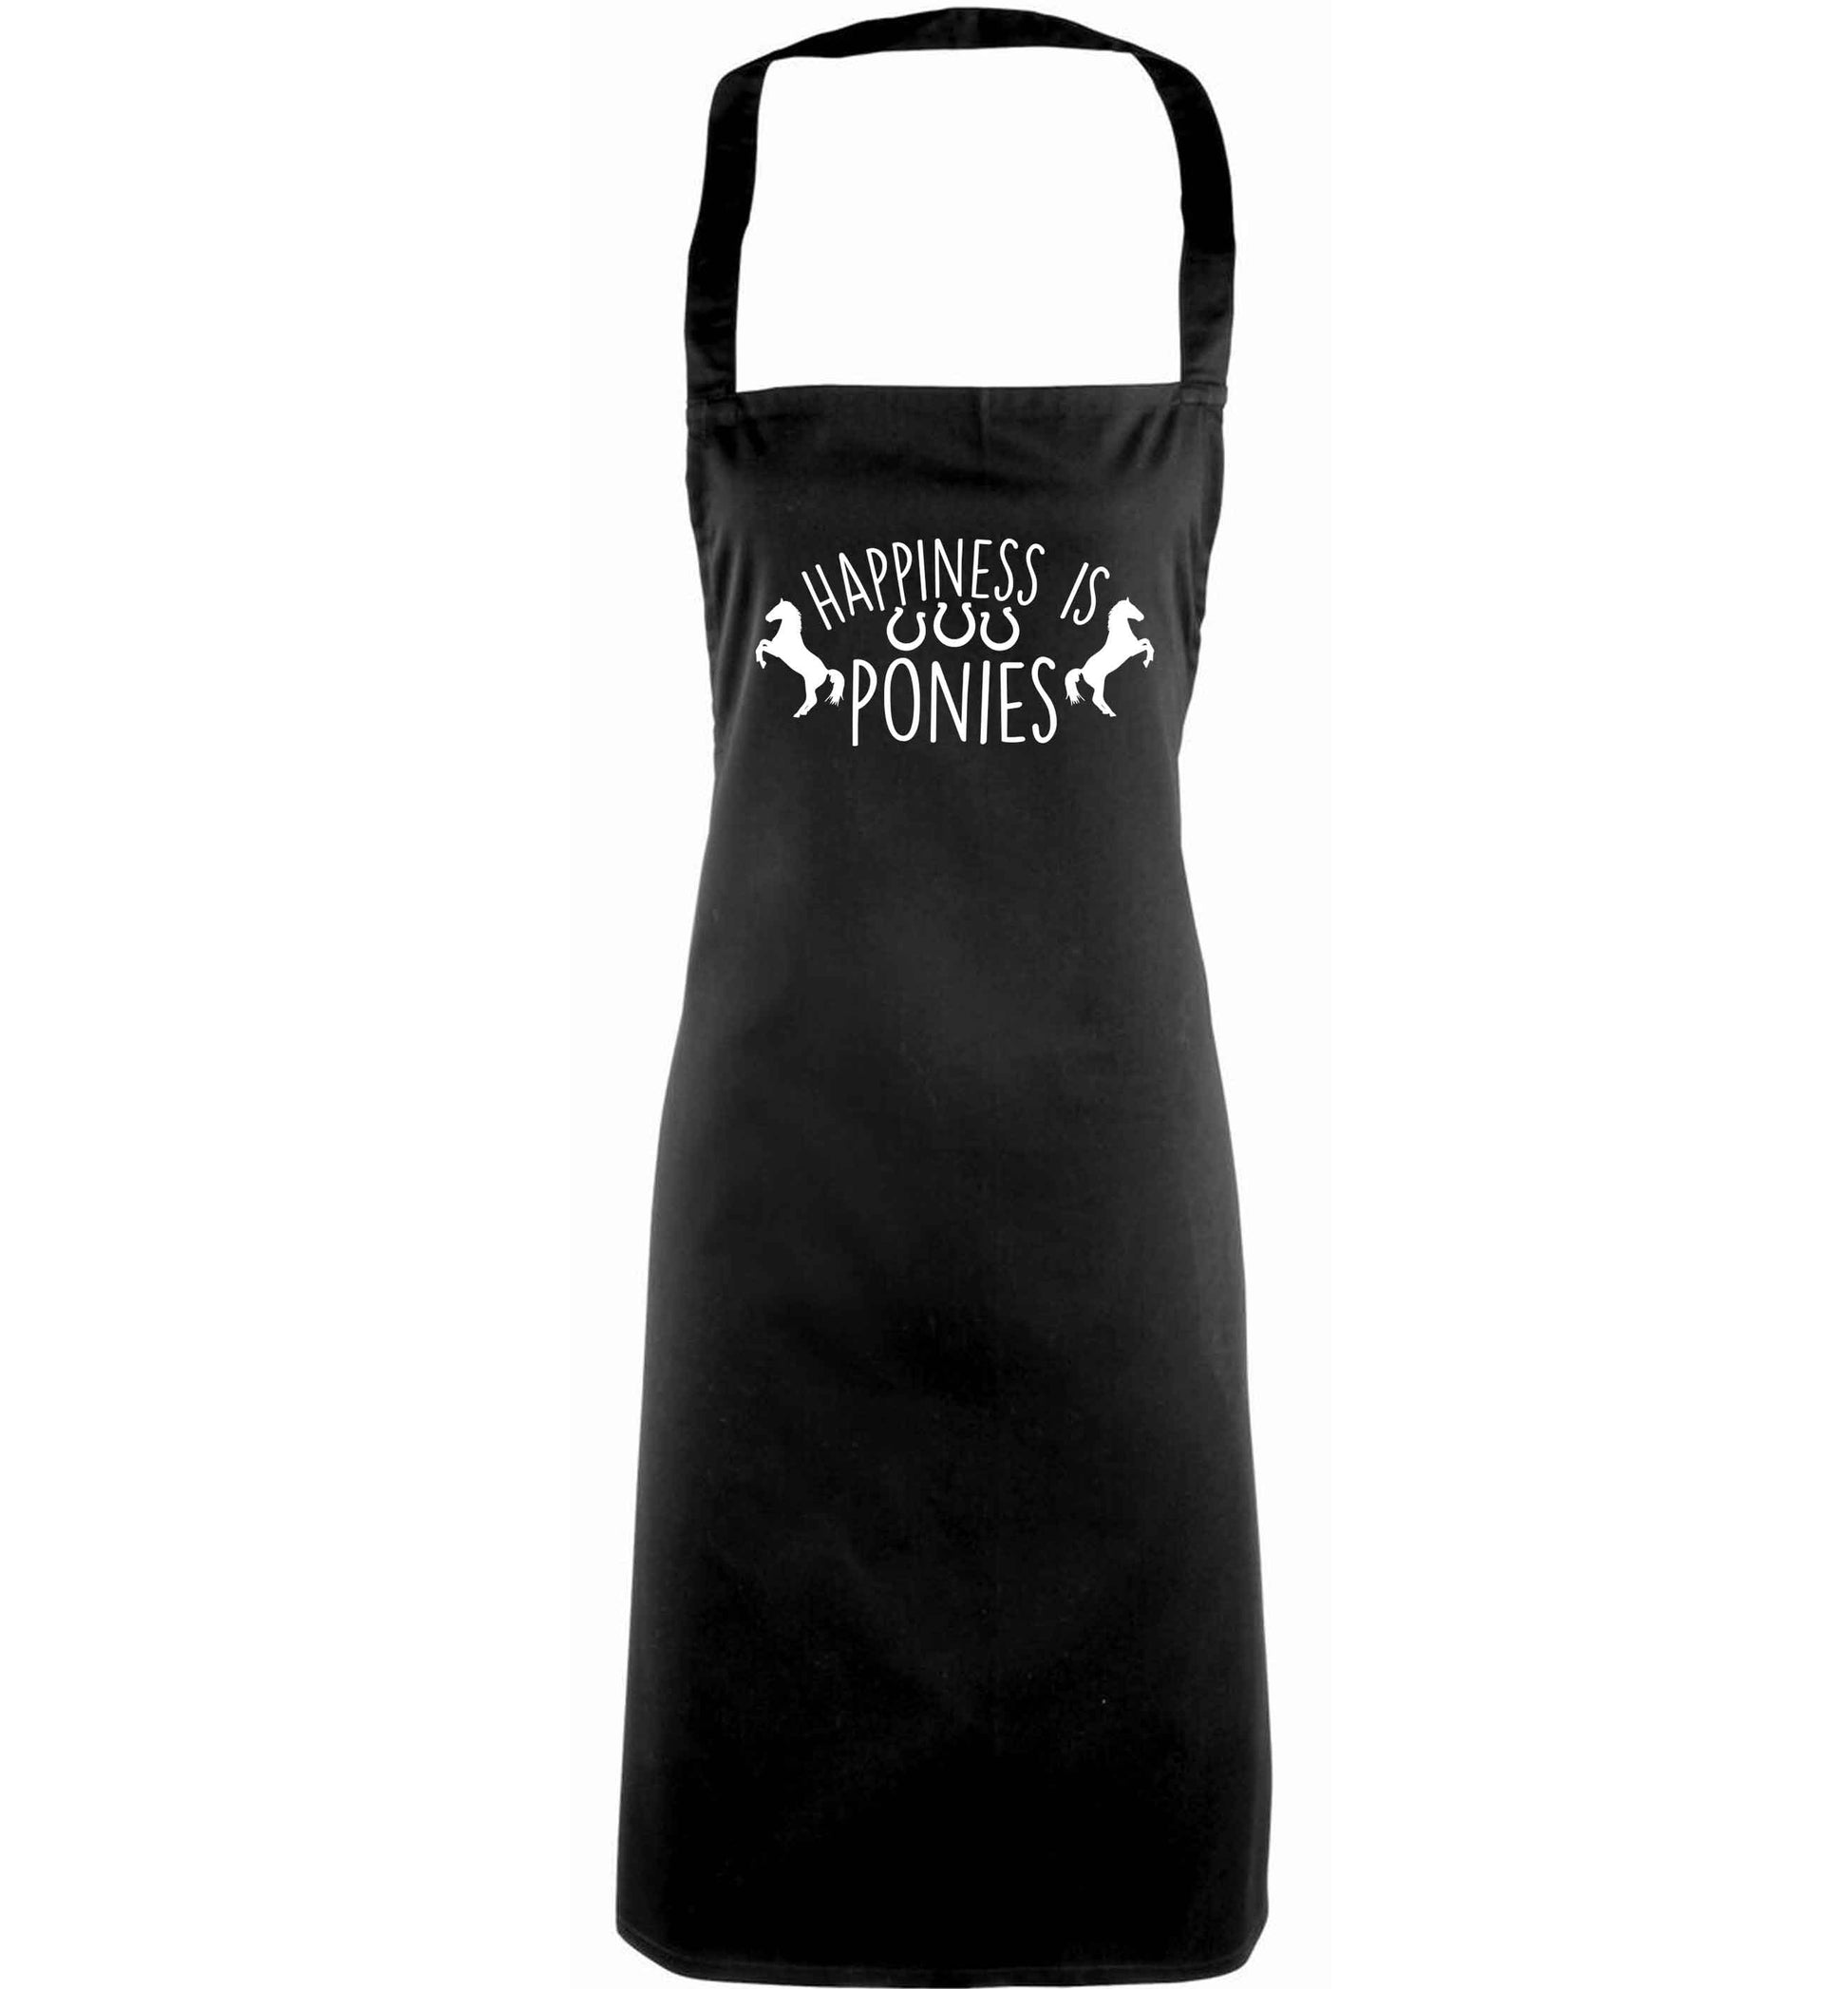 Happiness is ponies adults black apron